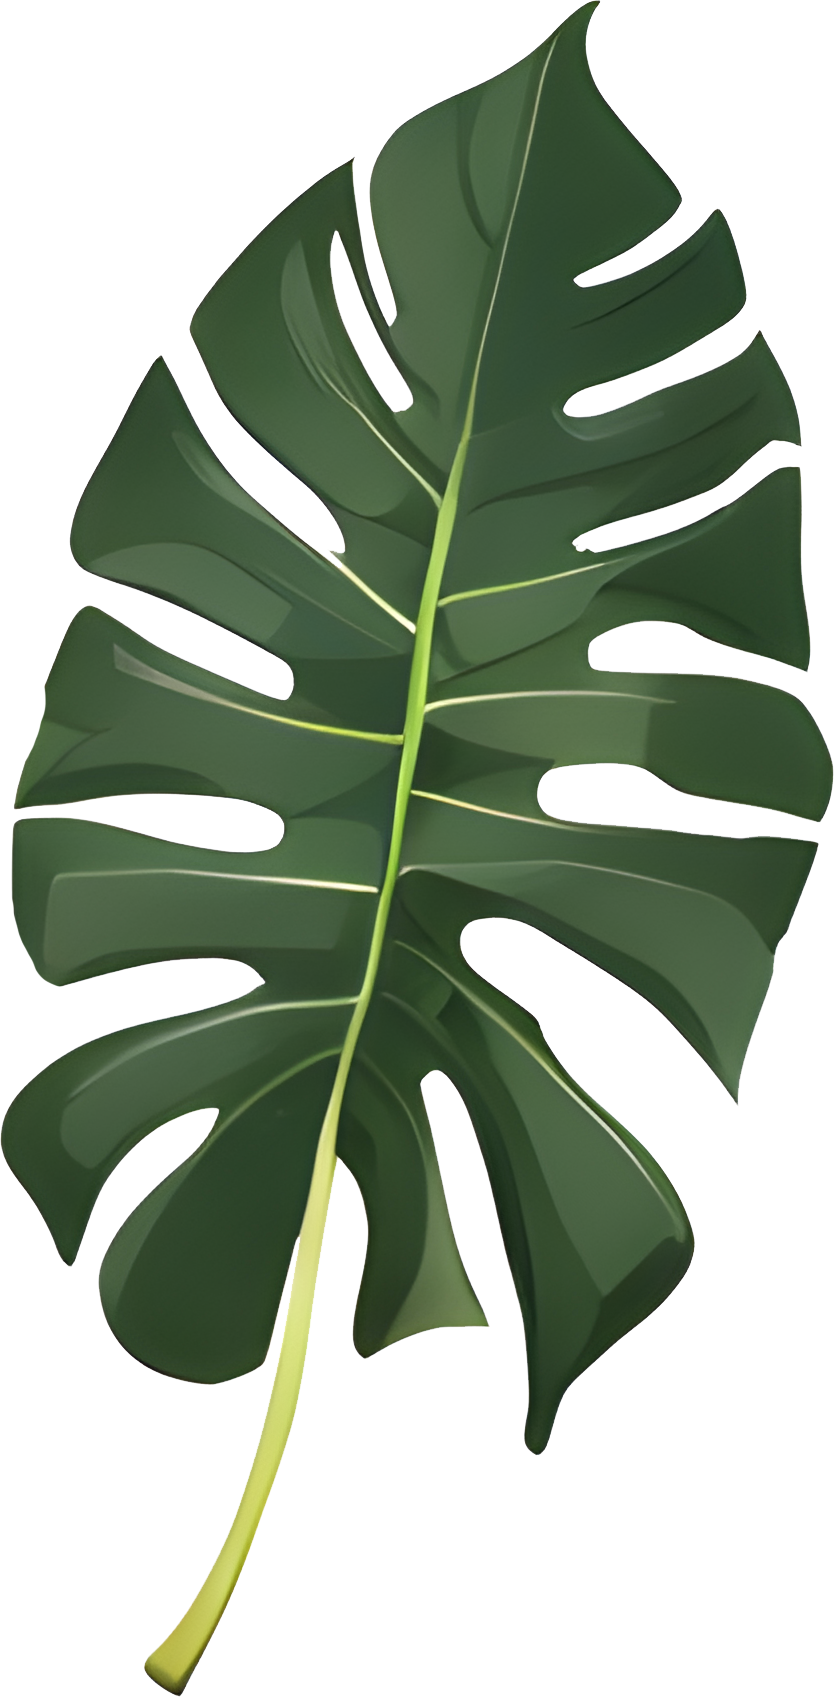 High-Res Leaf PNG Green Foliage Image, Tropical different type exotic leaves set. Jungle plants. Calathea, Monstera and different style of palm leaves_9